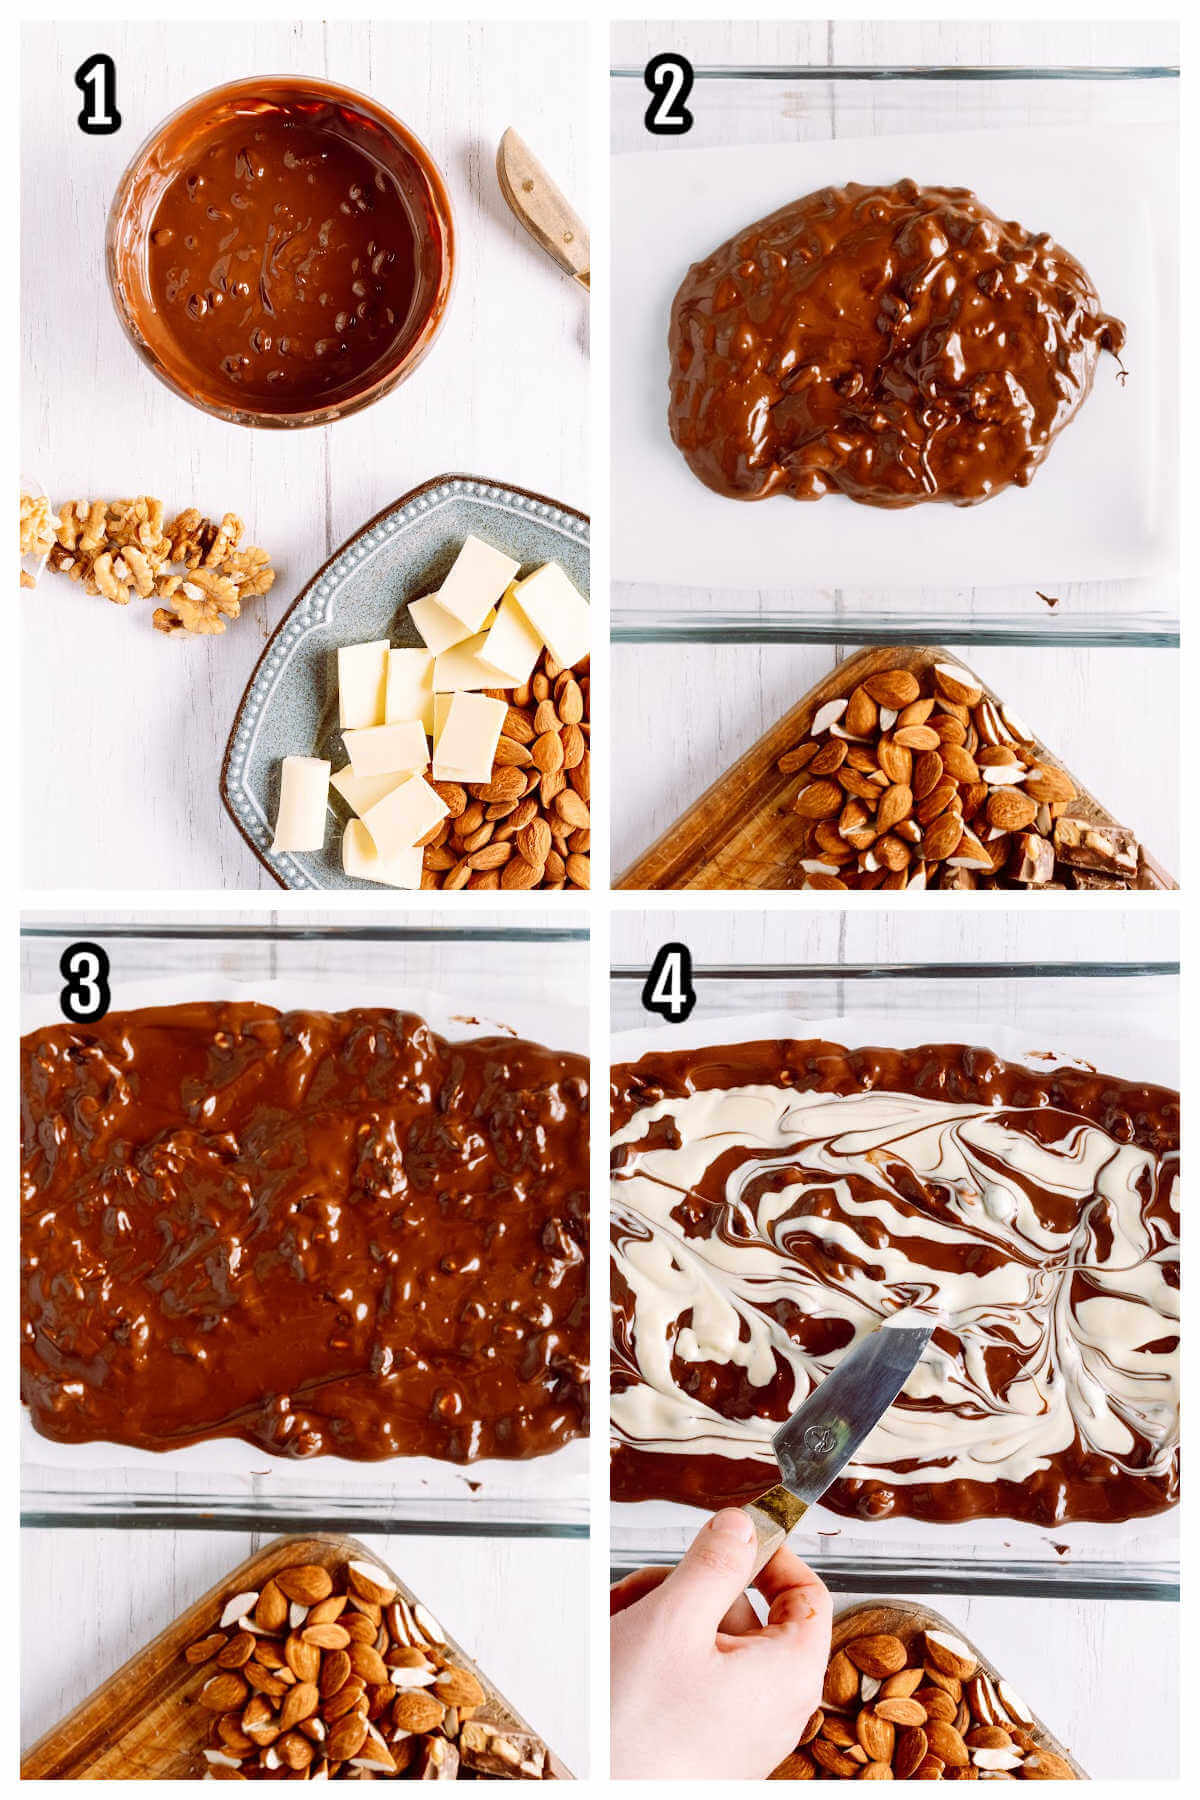 First four steps to making the marble almond chocolate bark with walnuts. 